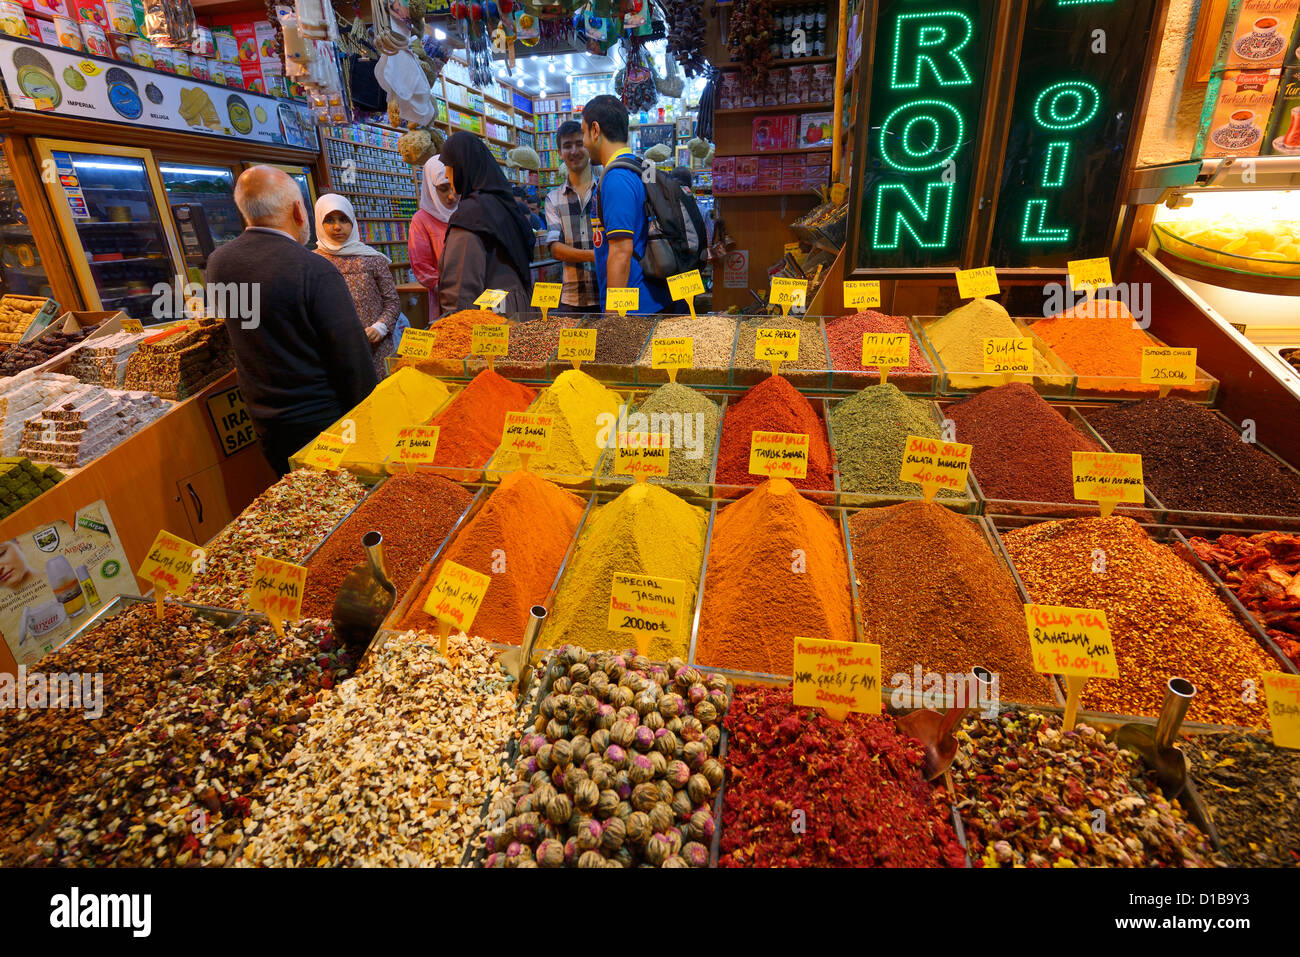 Local Turkish family shopping at a store in the Egyptian Spice Bazaar Eminonu Fatih Istanbul Turkey Stock Photo